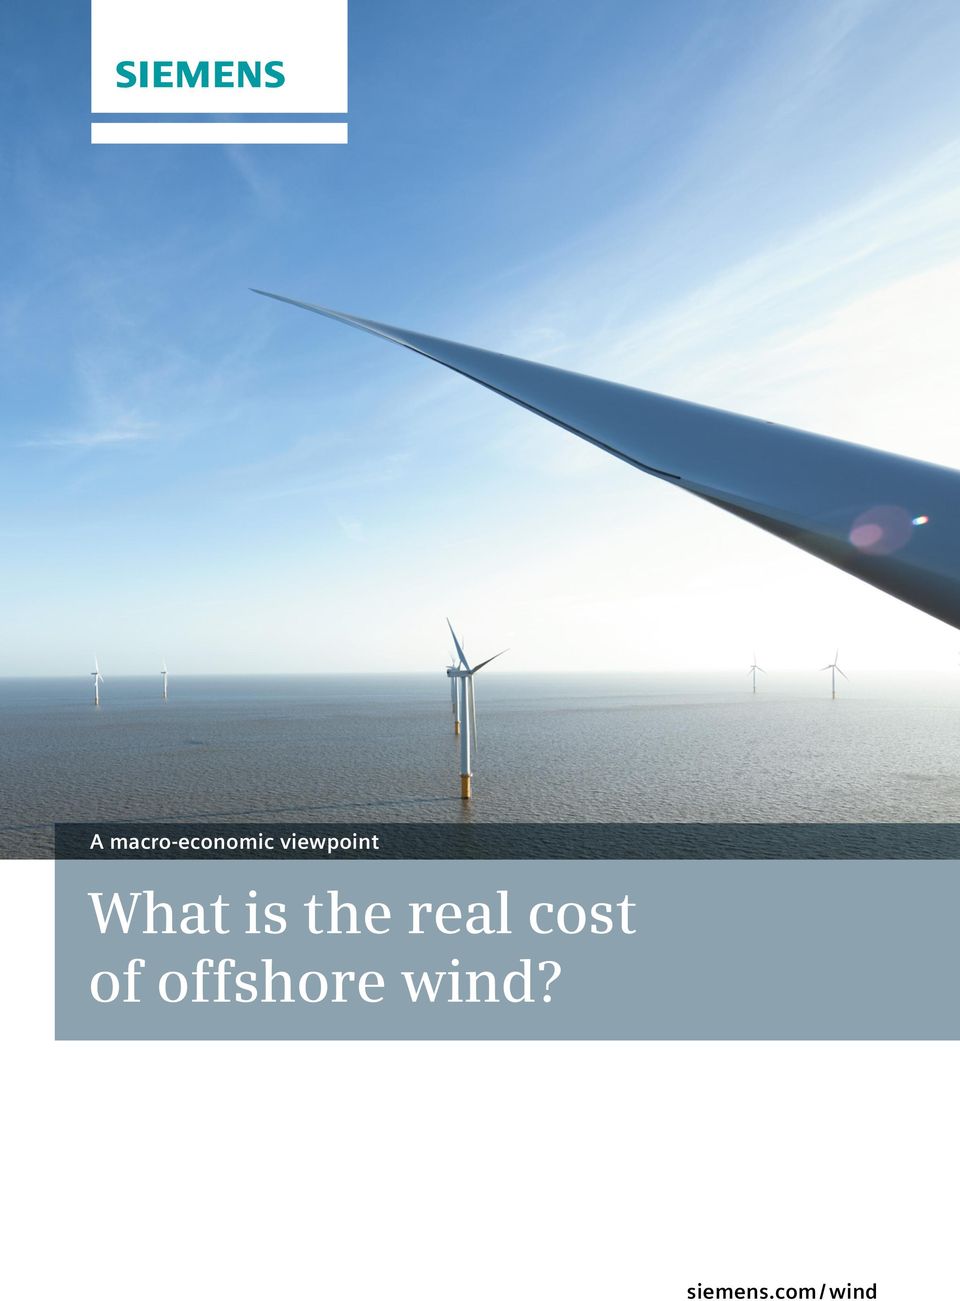 real cost of offshore